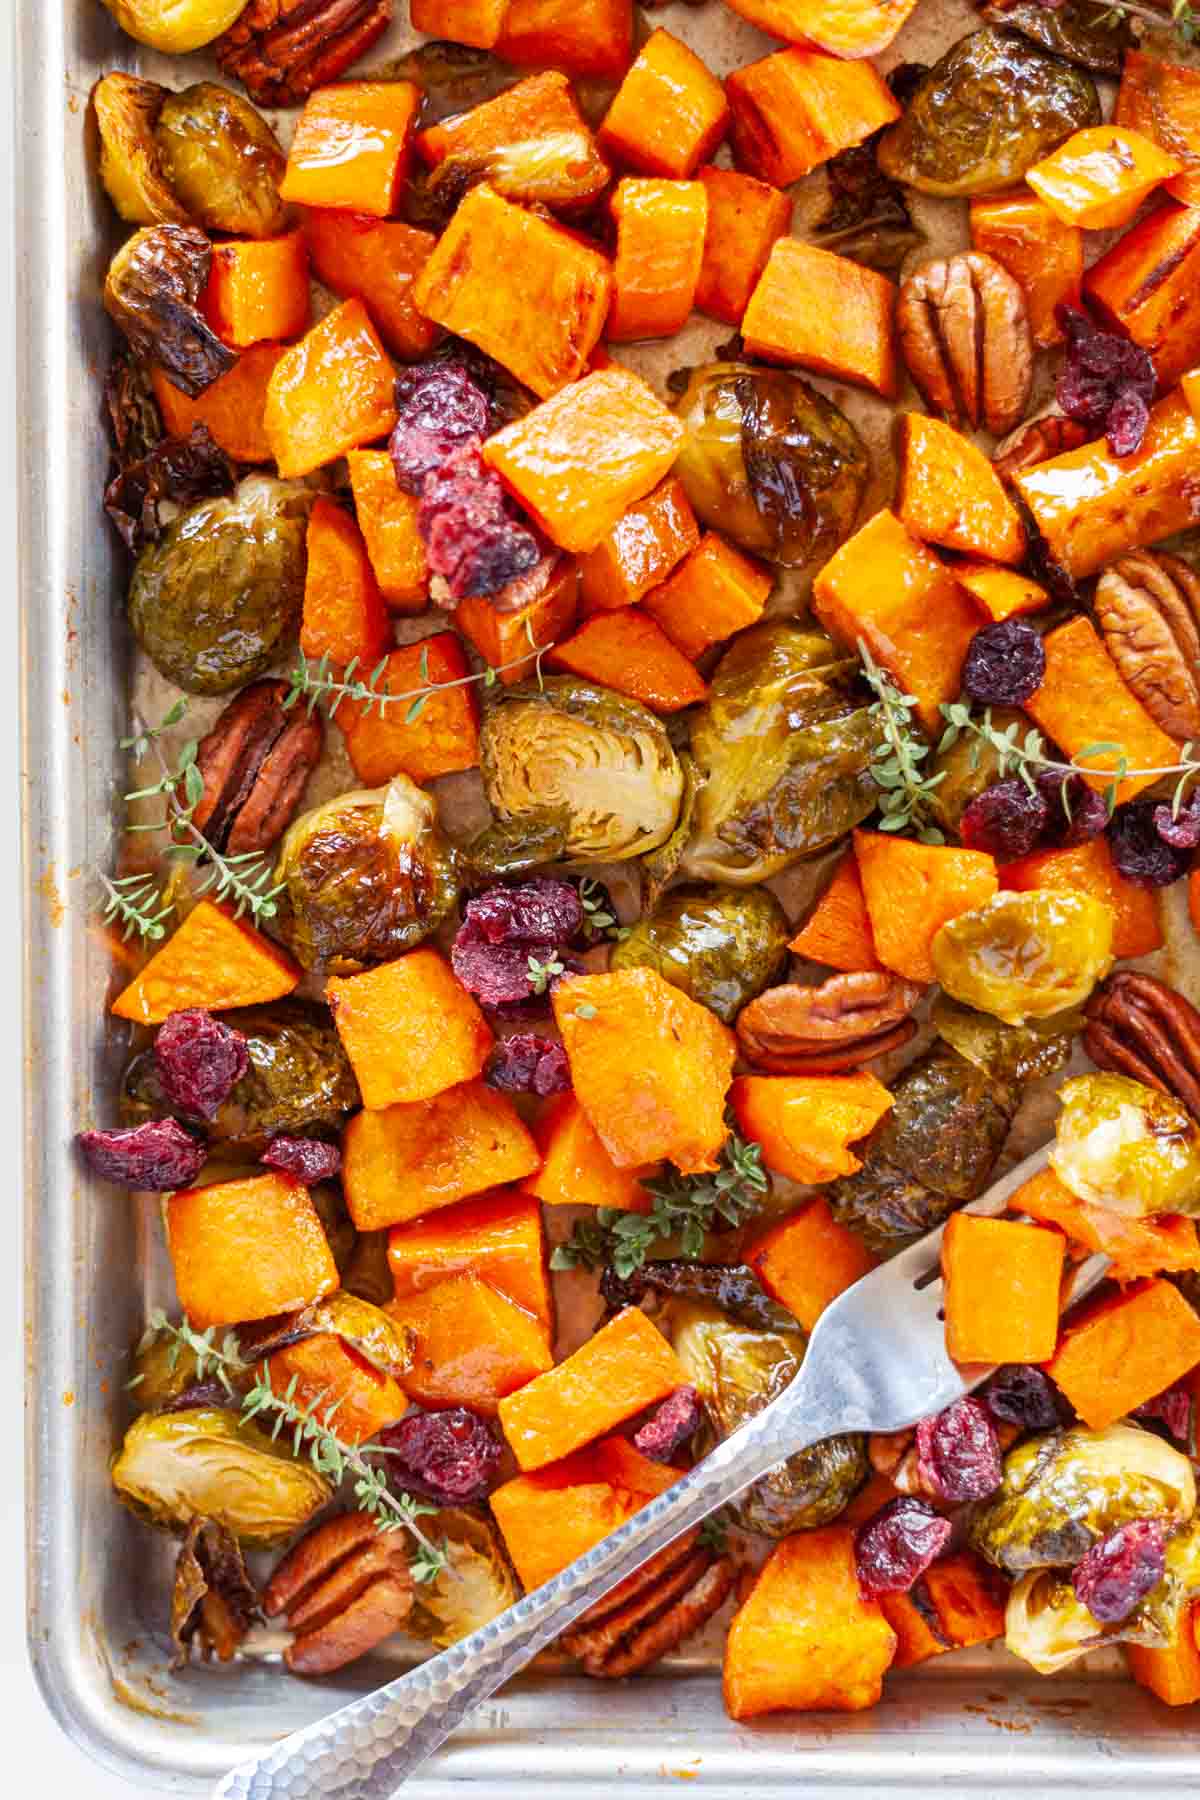 sheet pan of roasted sweet potatoes and Brussels sprouts garnished with pecans and dried cranberries